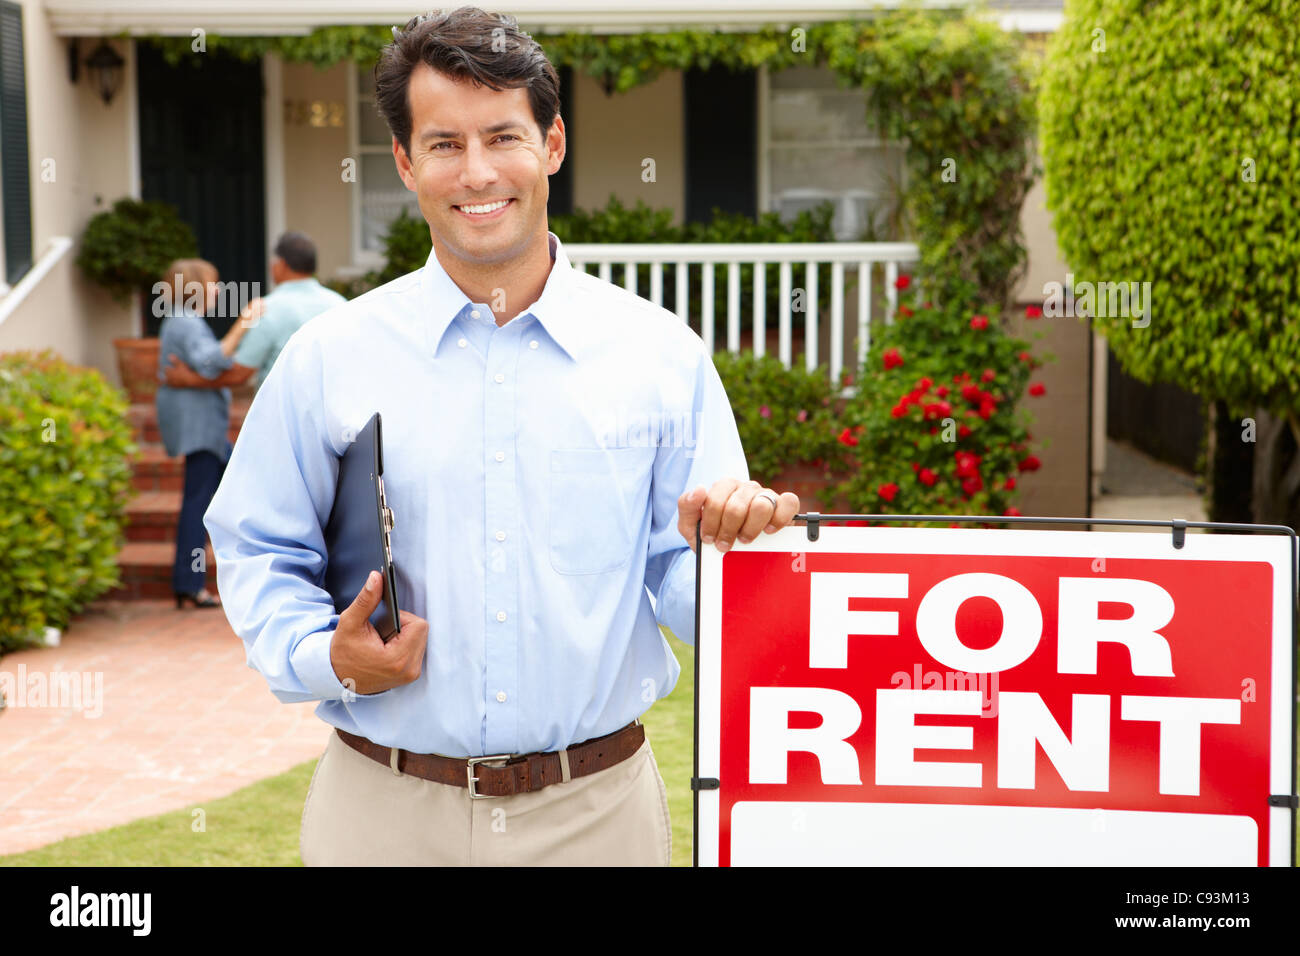 Real estate agent at work Stock Photo